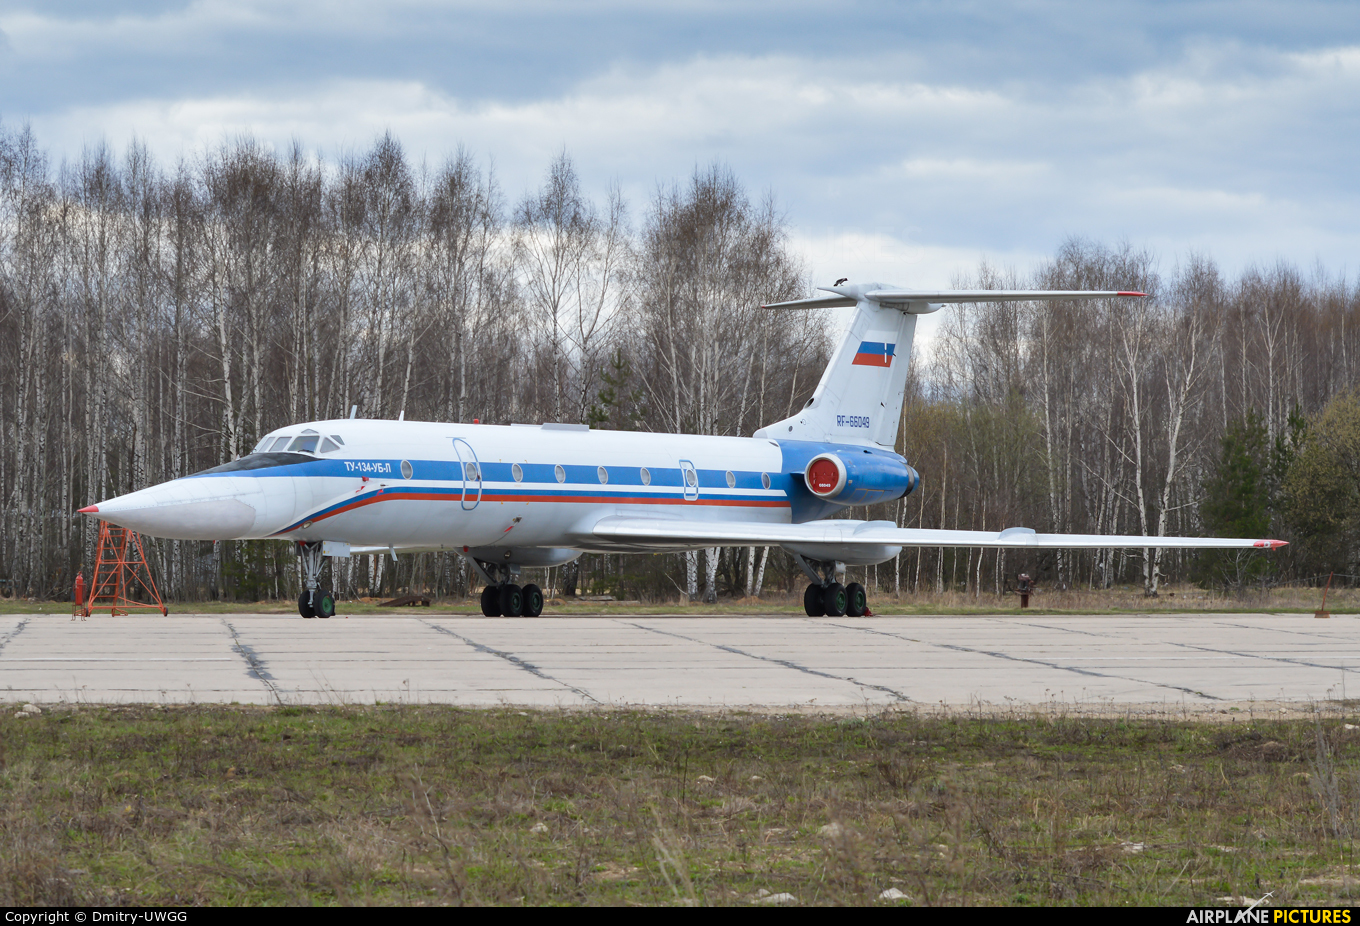 Russia - Ministry of Internal Affairs RF-66049 aircraft at Undisclosed Location